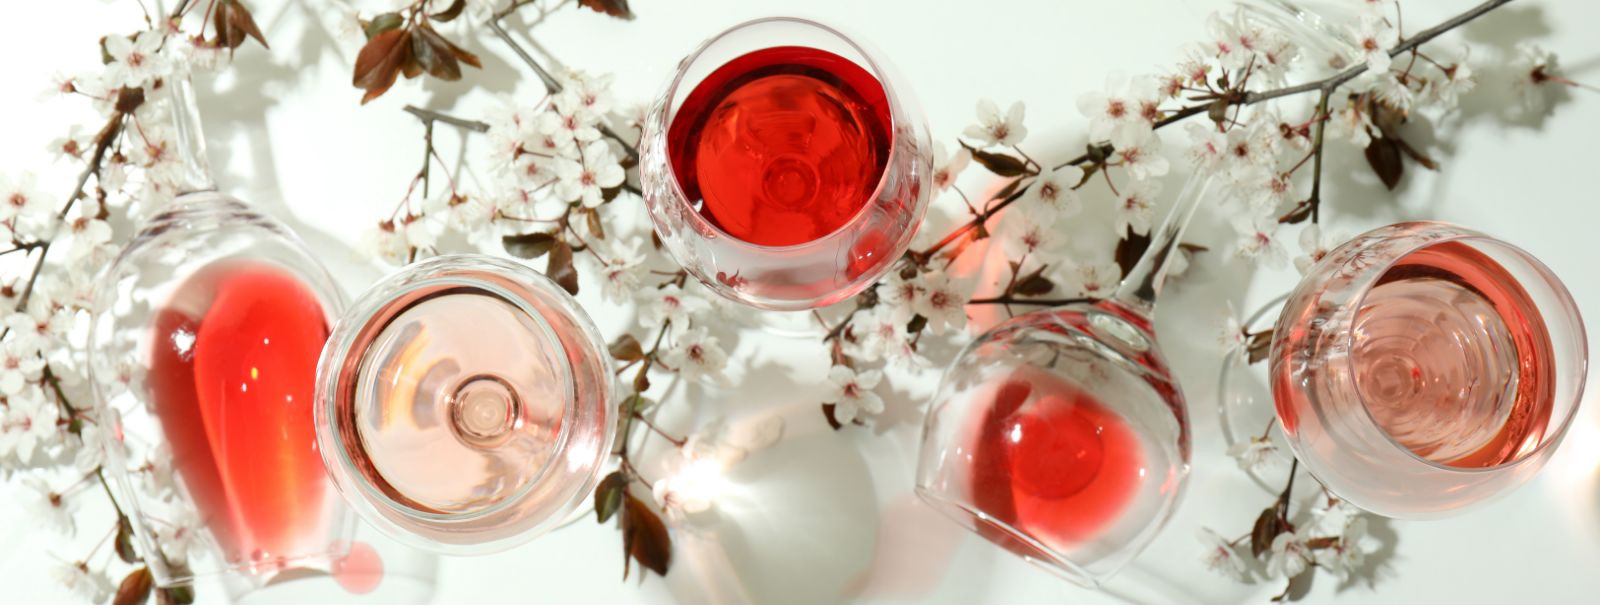 Once relegated to the realm of casual summer sipping, rose wine has undergone a remarkable transformation. It's now recognized as a sophisticated choice for con